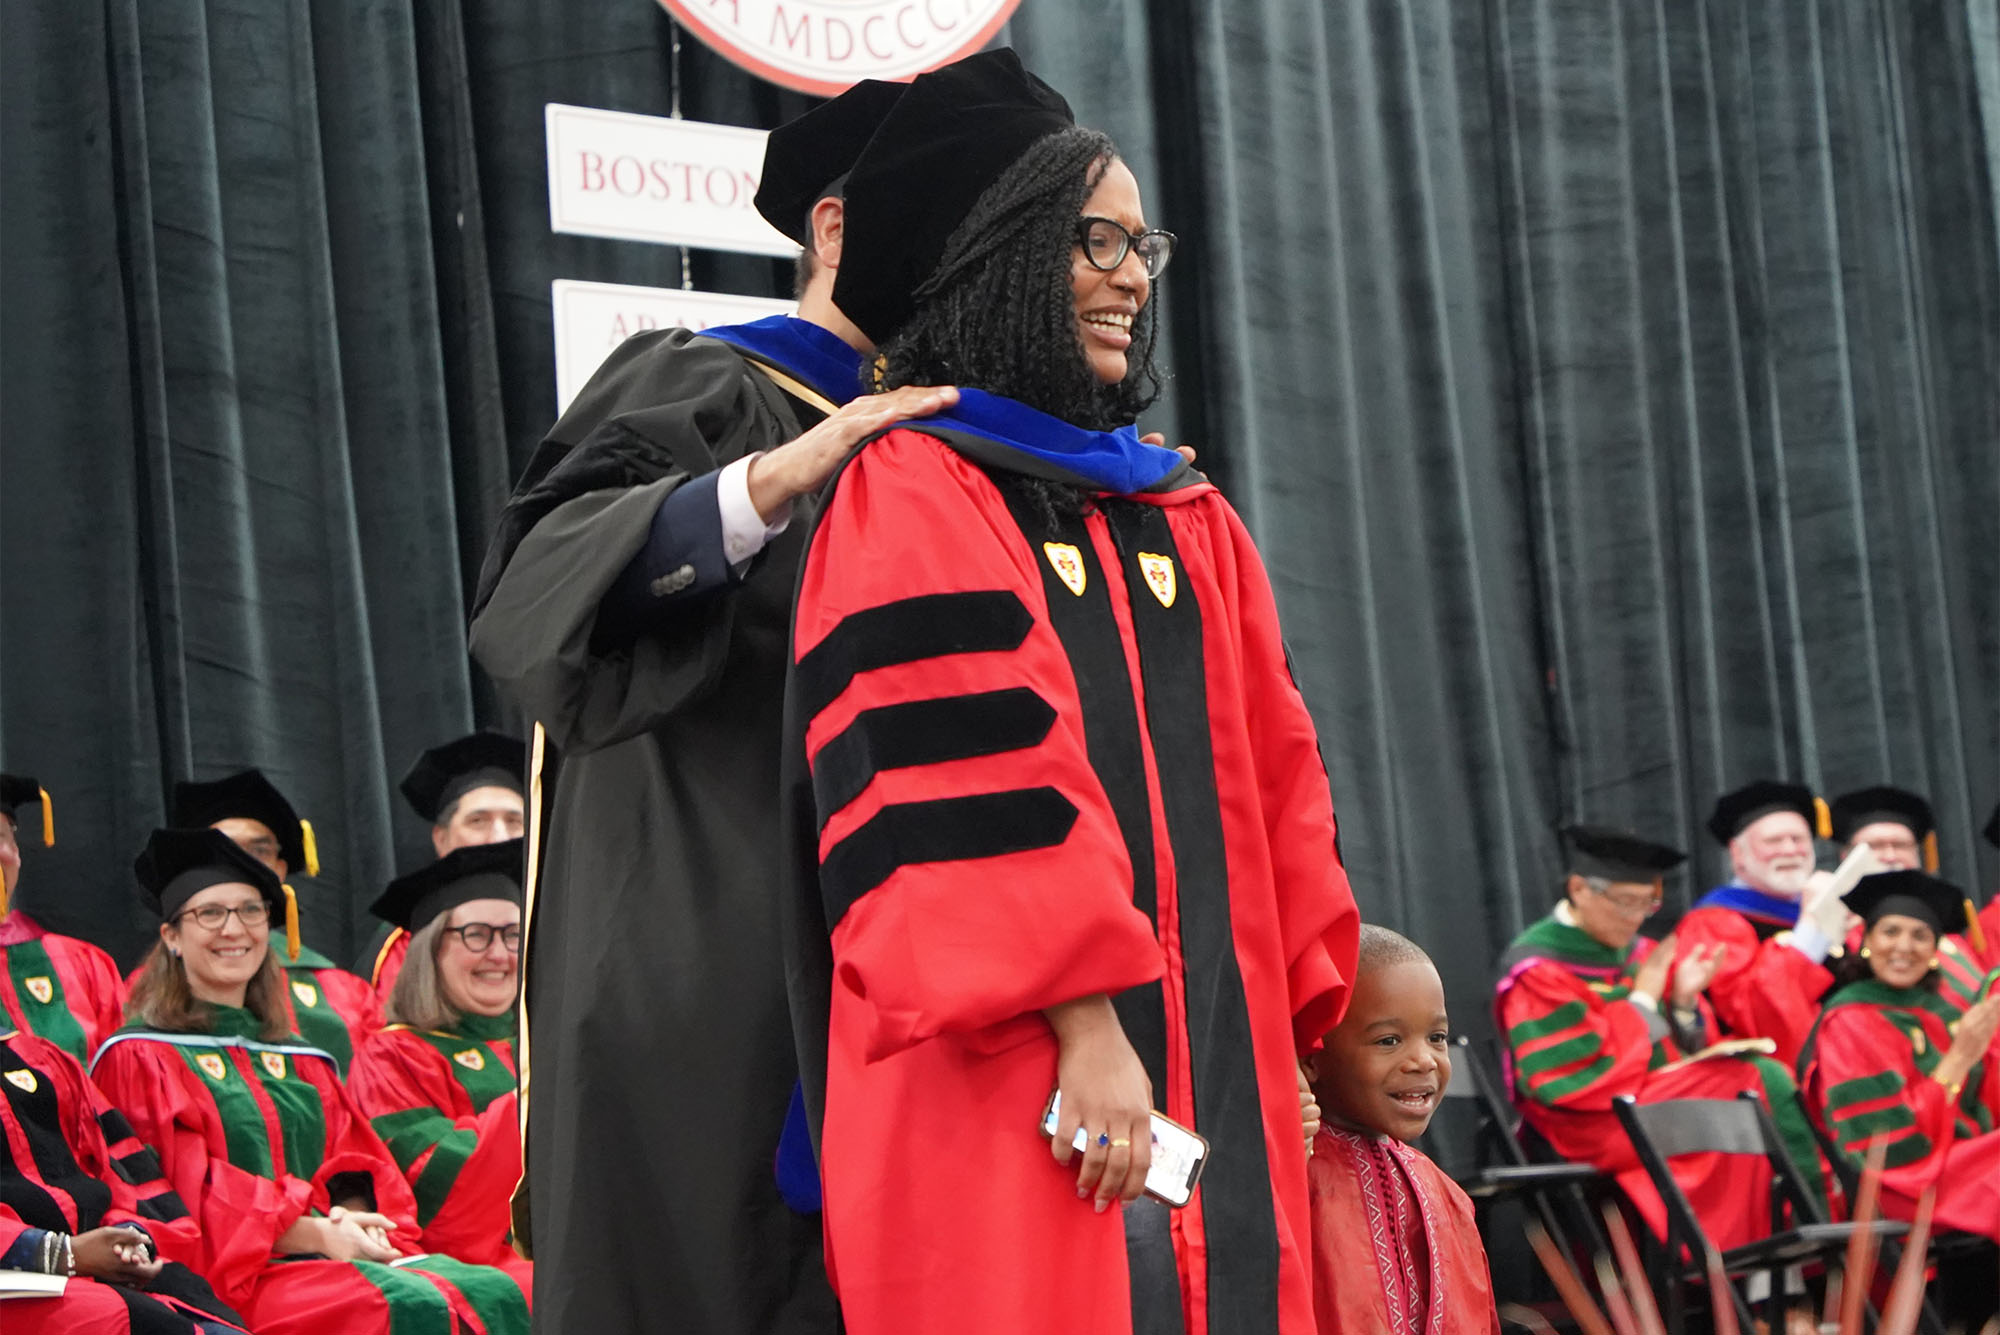 Photo: MD student speaker Josiane Fofana (CAMED’24), with her three-year-old, as she receives her doctoral hood at the BU medical school’s MD and PhD convocation ceremony May 16. A black woman wearing a robe and doctoral hood stands in front of a room of other graduates who are clapping